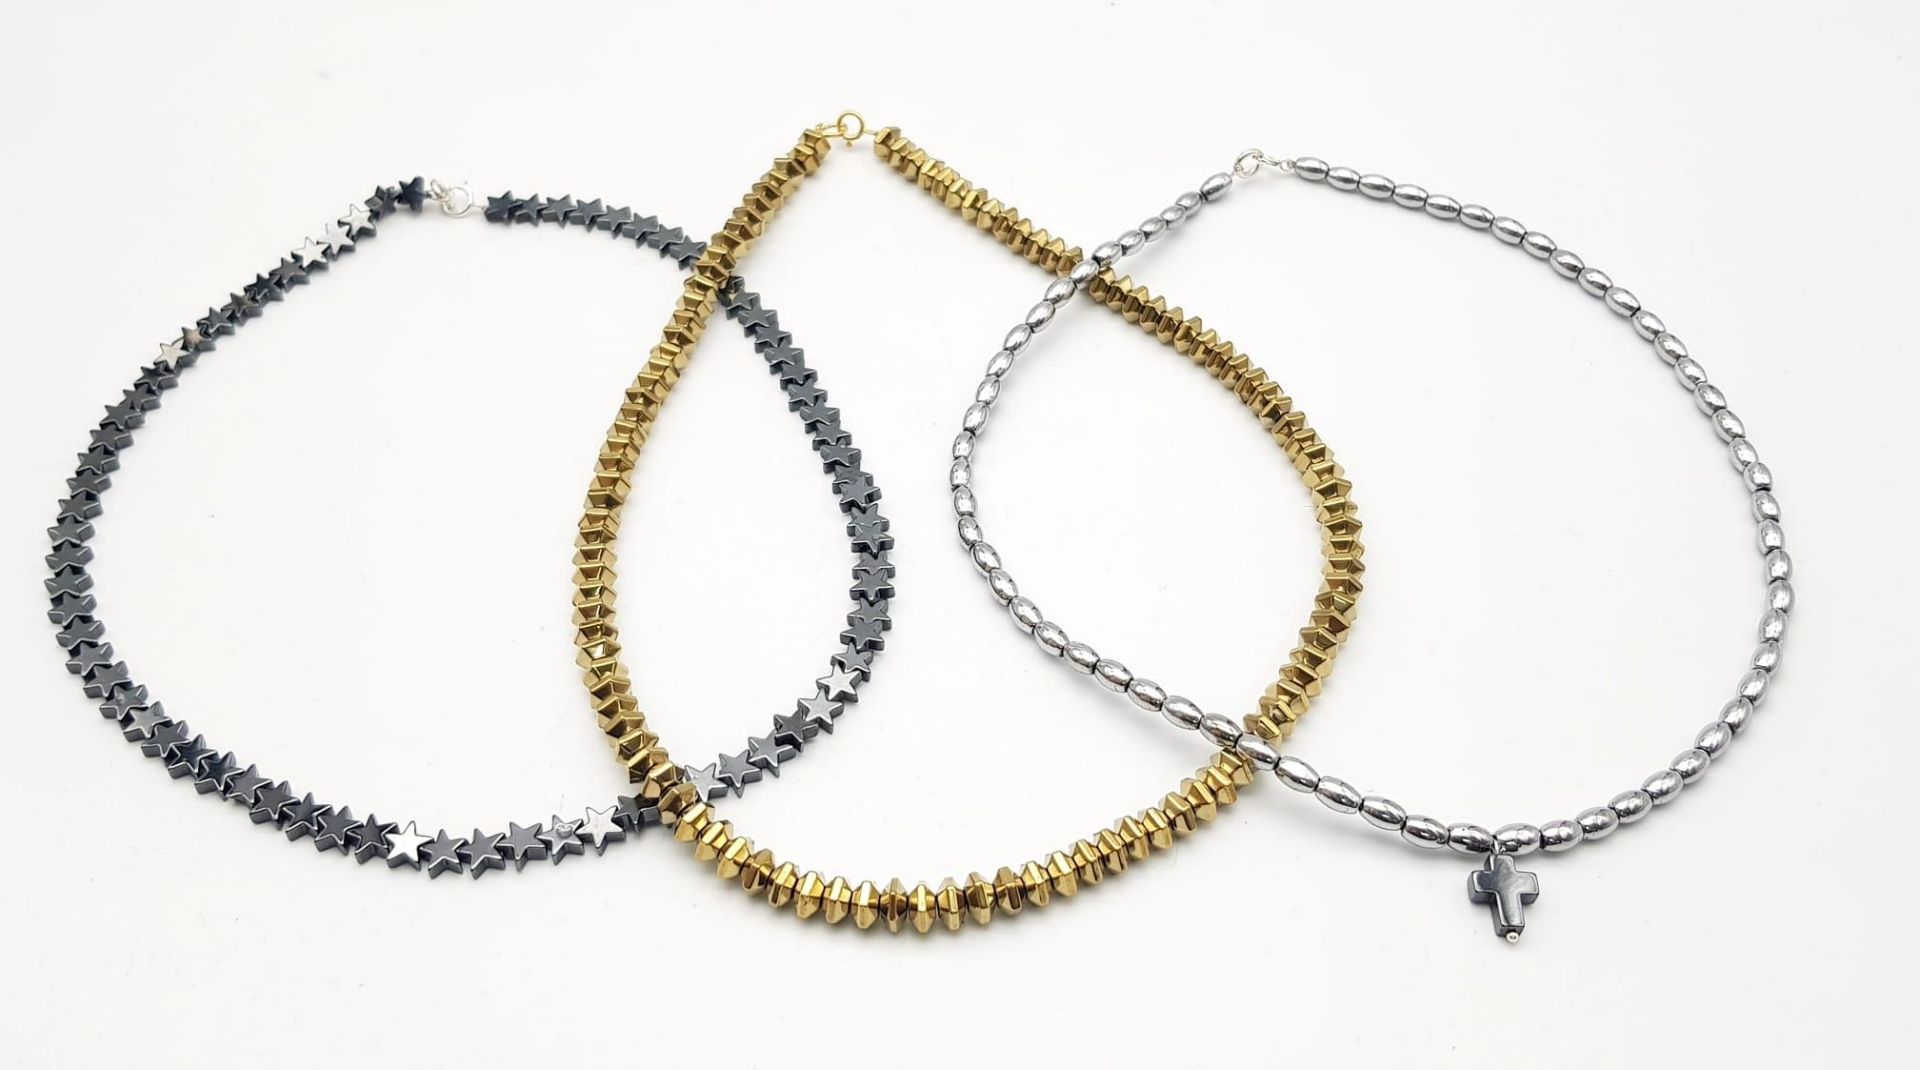 A Selection of Three Hematite Necklaces. All 42cm. - Image 5 of 5